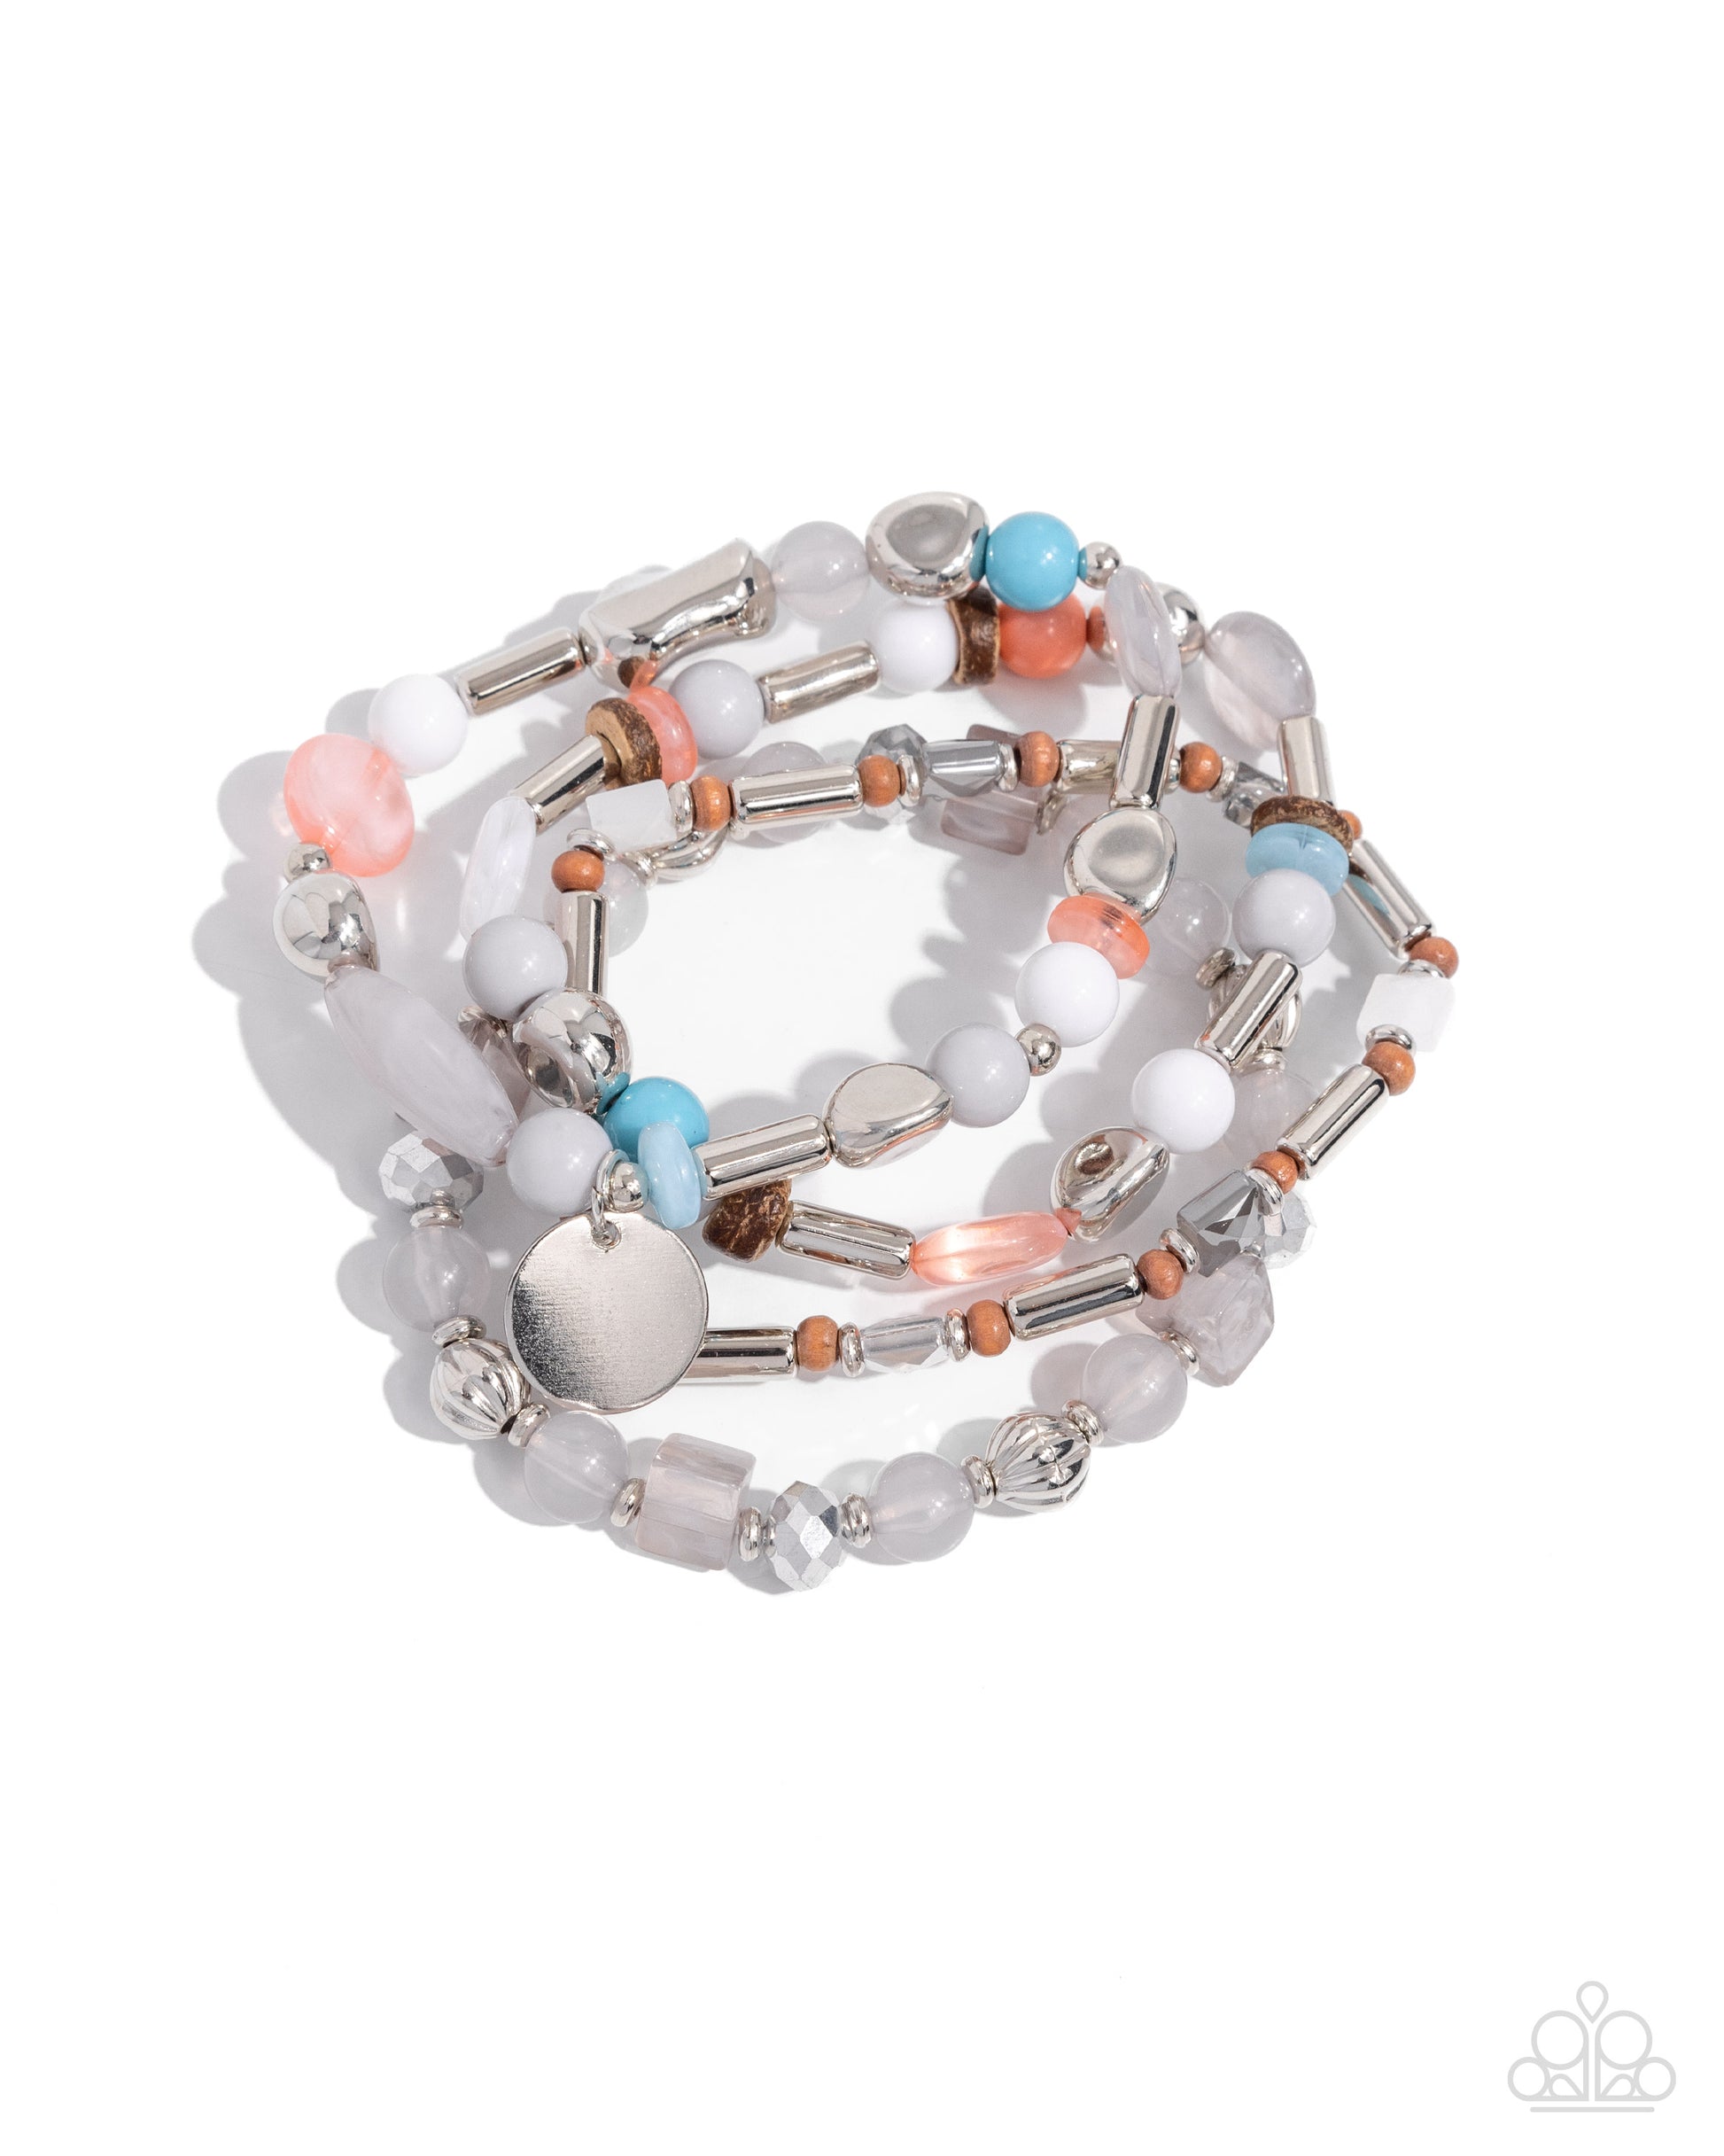 Cloudy Chic Silver Stretch Bracelet - Paparazzi Accessories  Featuring various opacities, Northern Droplet, Desert Flower, Capri Blue, and white beads in varying shapes join wooden beads, silver beads, and a silver disc along elastic stretchy bands for a cloudy stack of charm up the wrist.  Sold as one set of four bracelets.  SKU: P9RE-SVXX-336XX